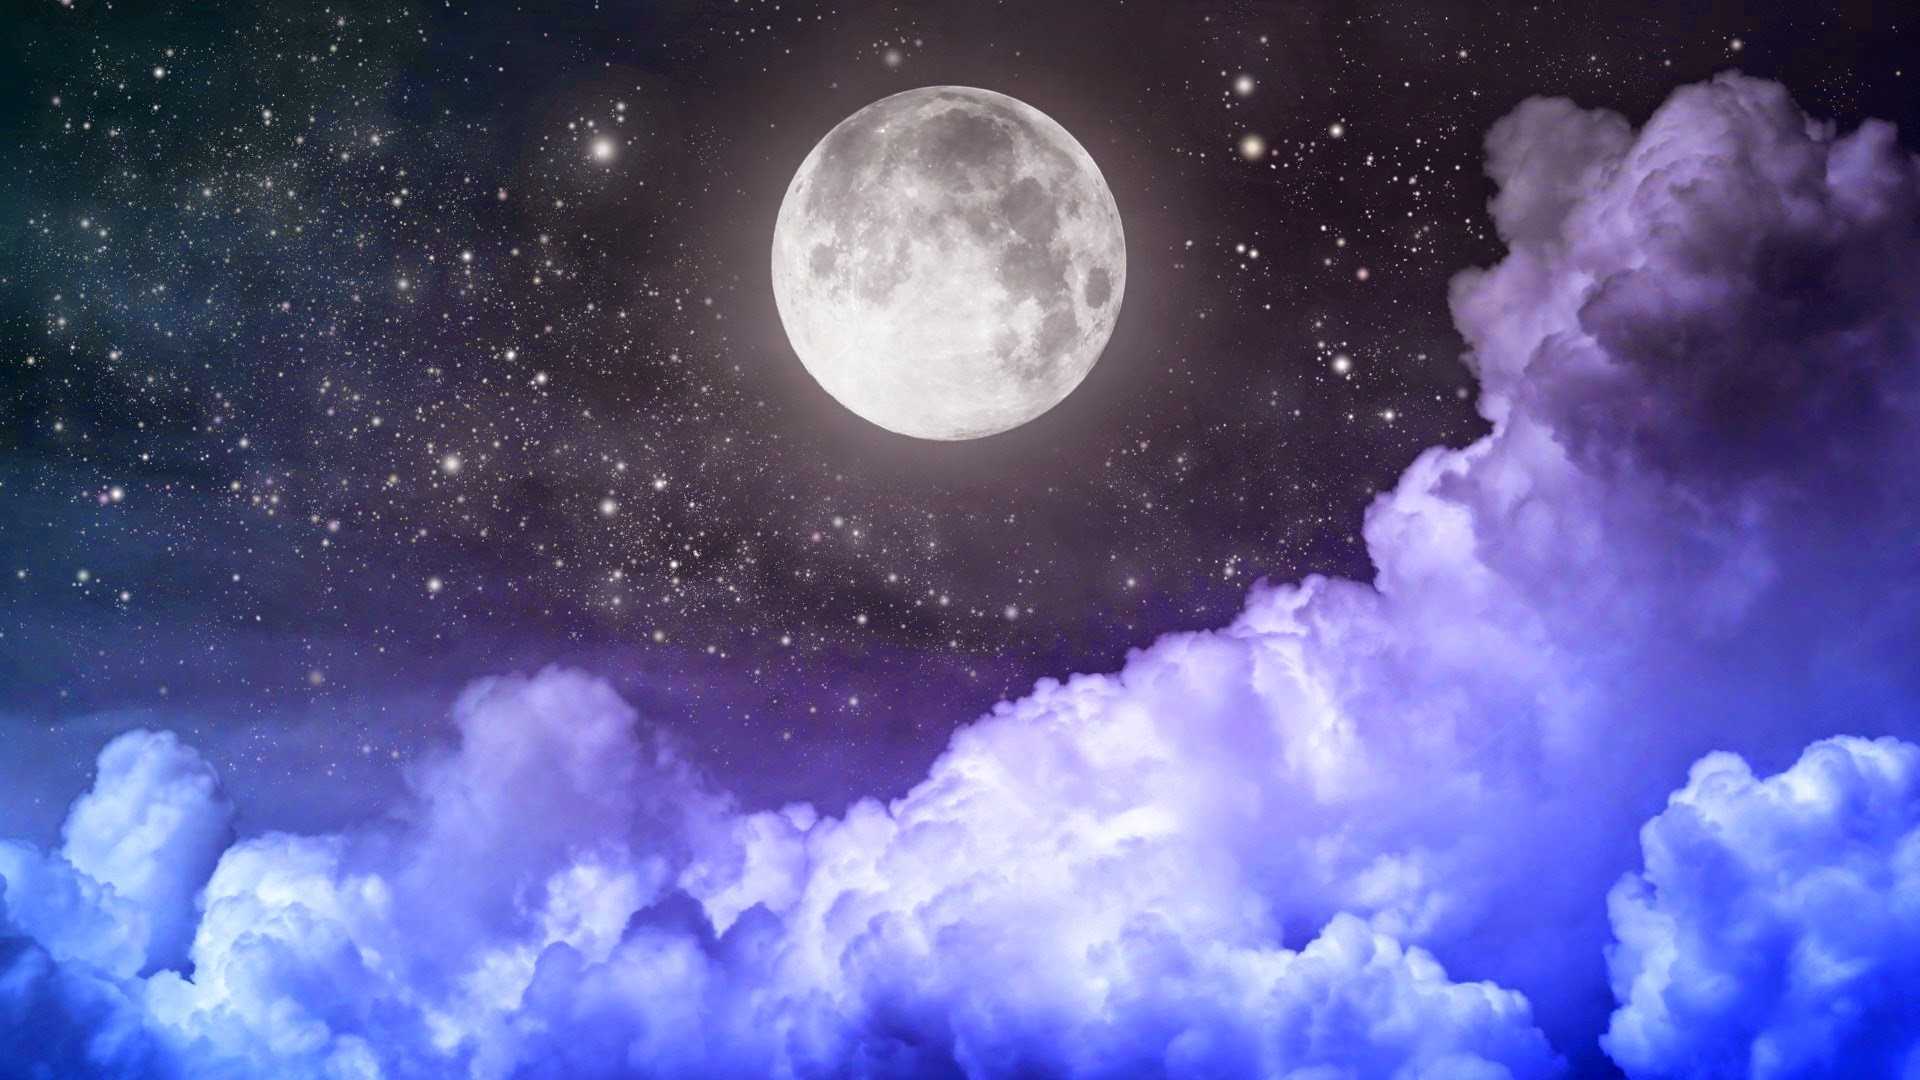 A full moon in a starry sky with clouds - Moon, galaxy